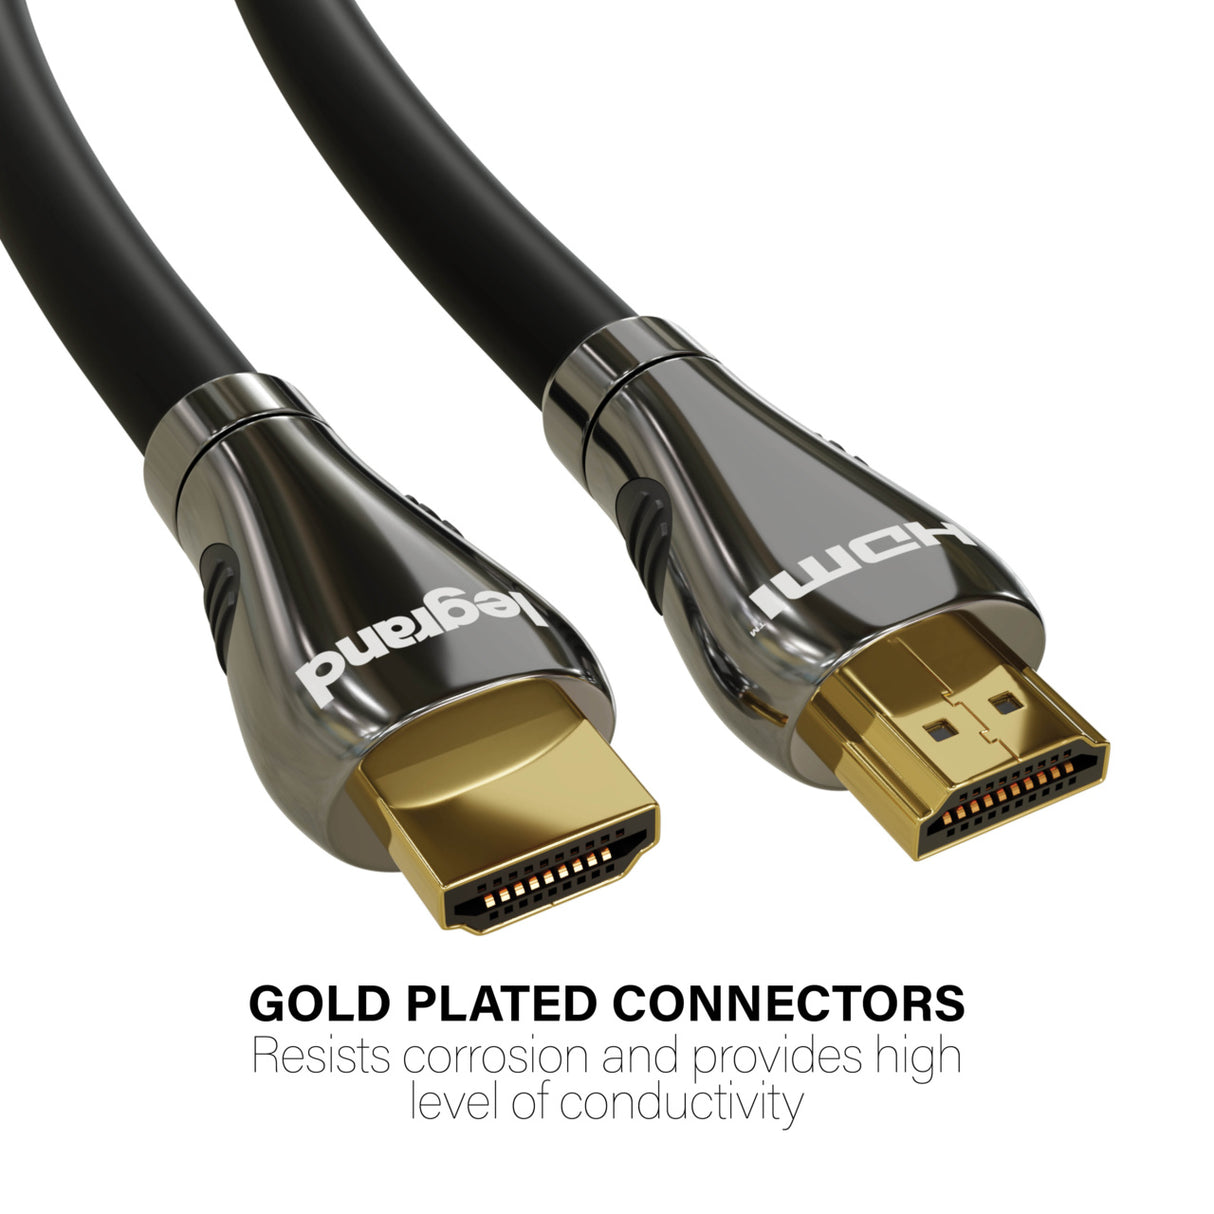 OnQ AC8K2MBK 8K Ultra High Speed HDMI 2.1  Cable 2M